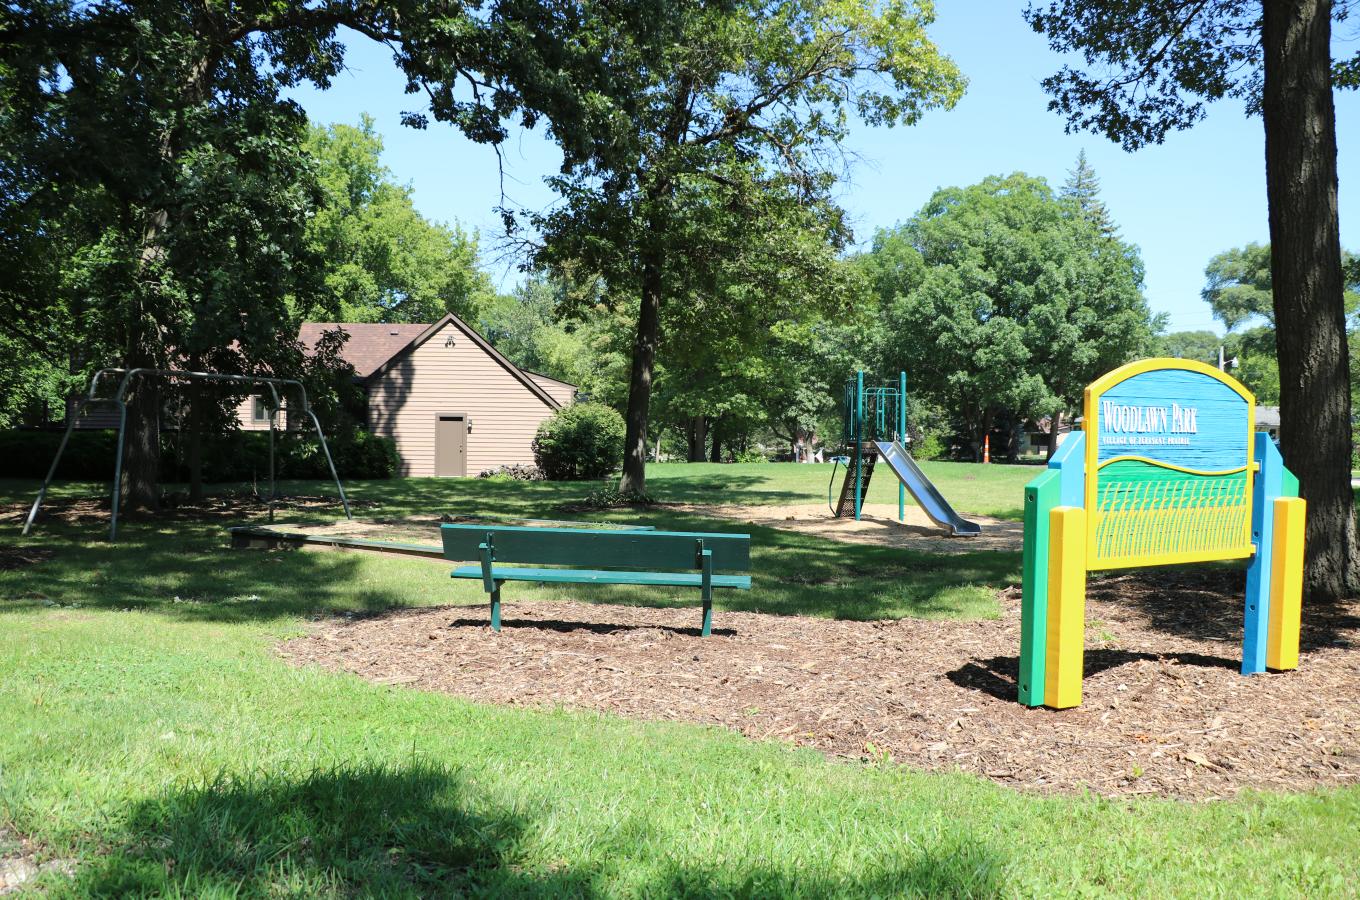 Woodlawn Park Sign with playground equipment in back V Pic